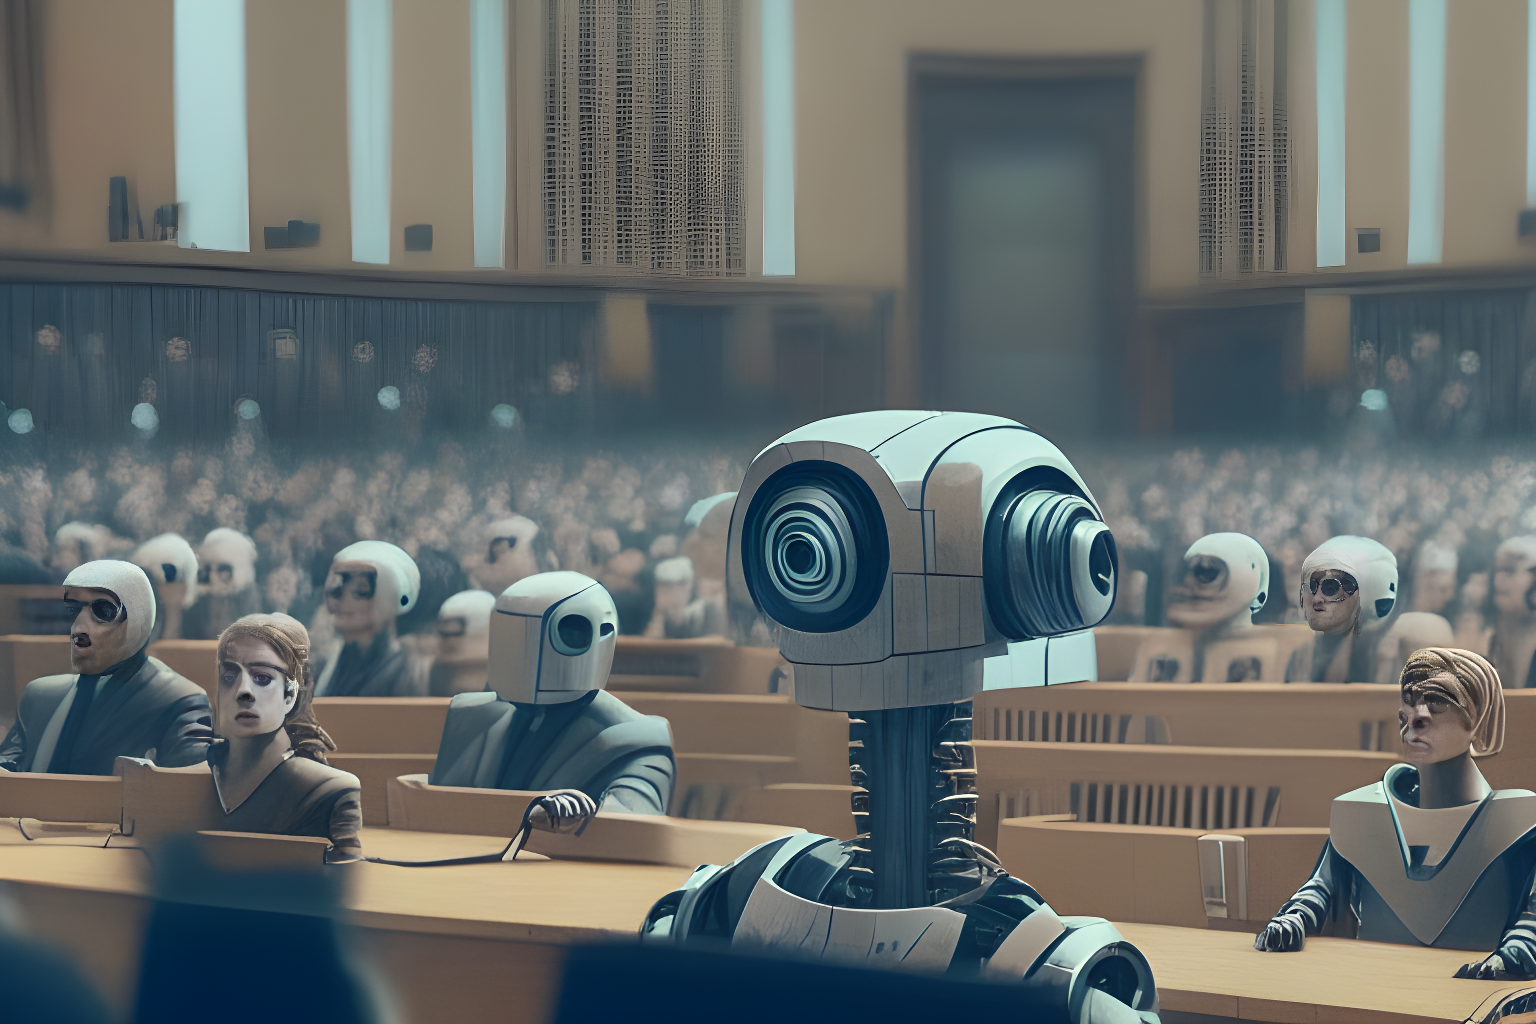 A government hearing with robots in the audience